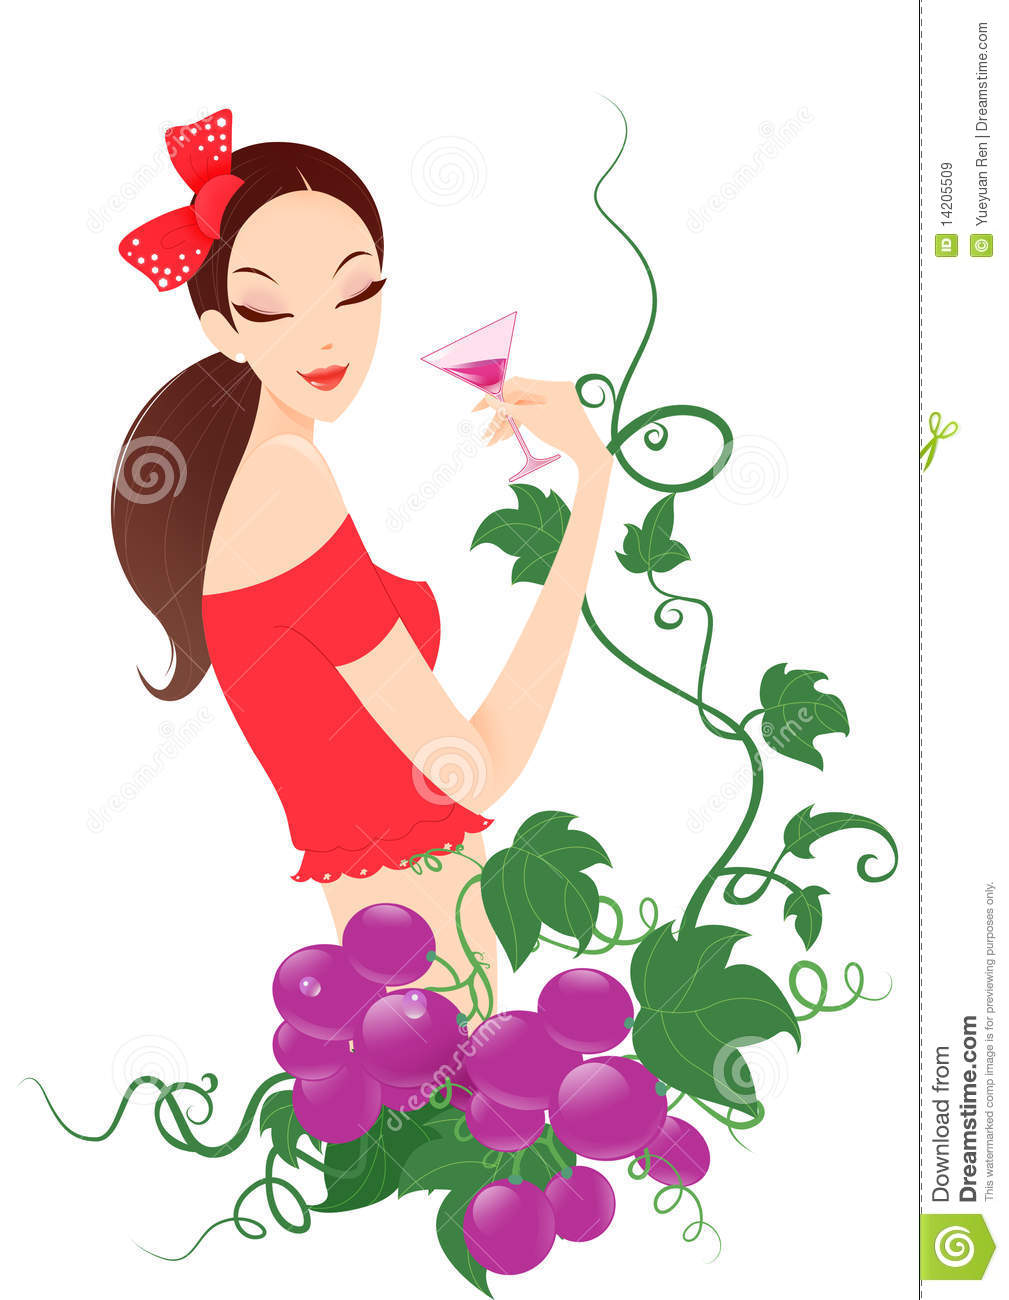 Girls Drinking Wine Clipart   Cliparthut   Free Clipart